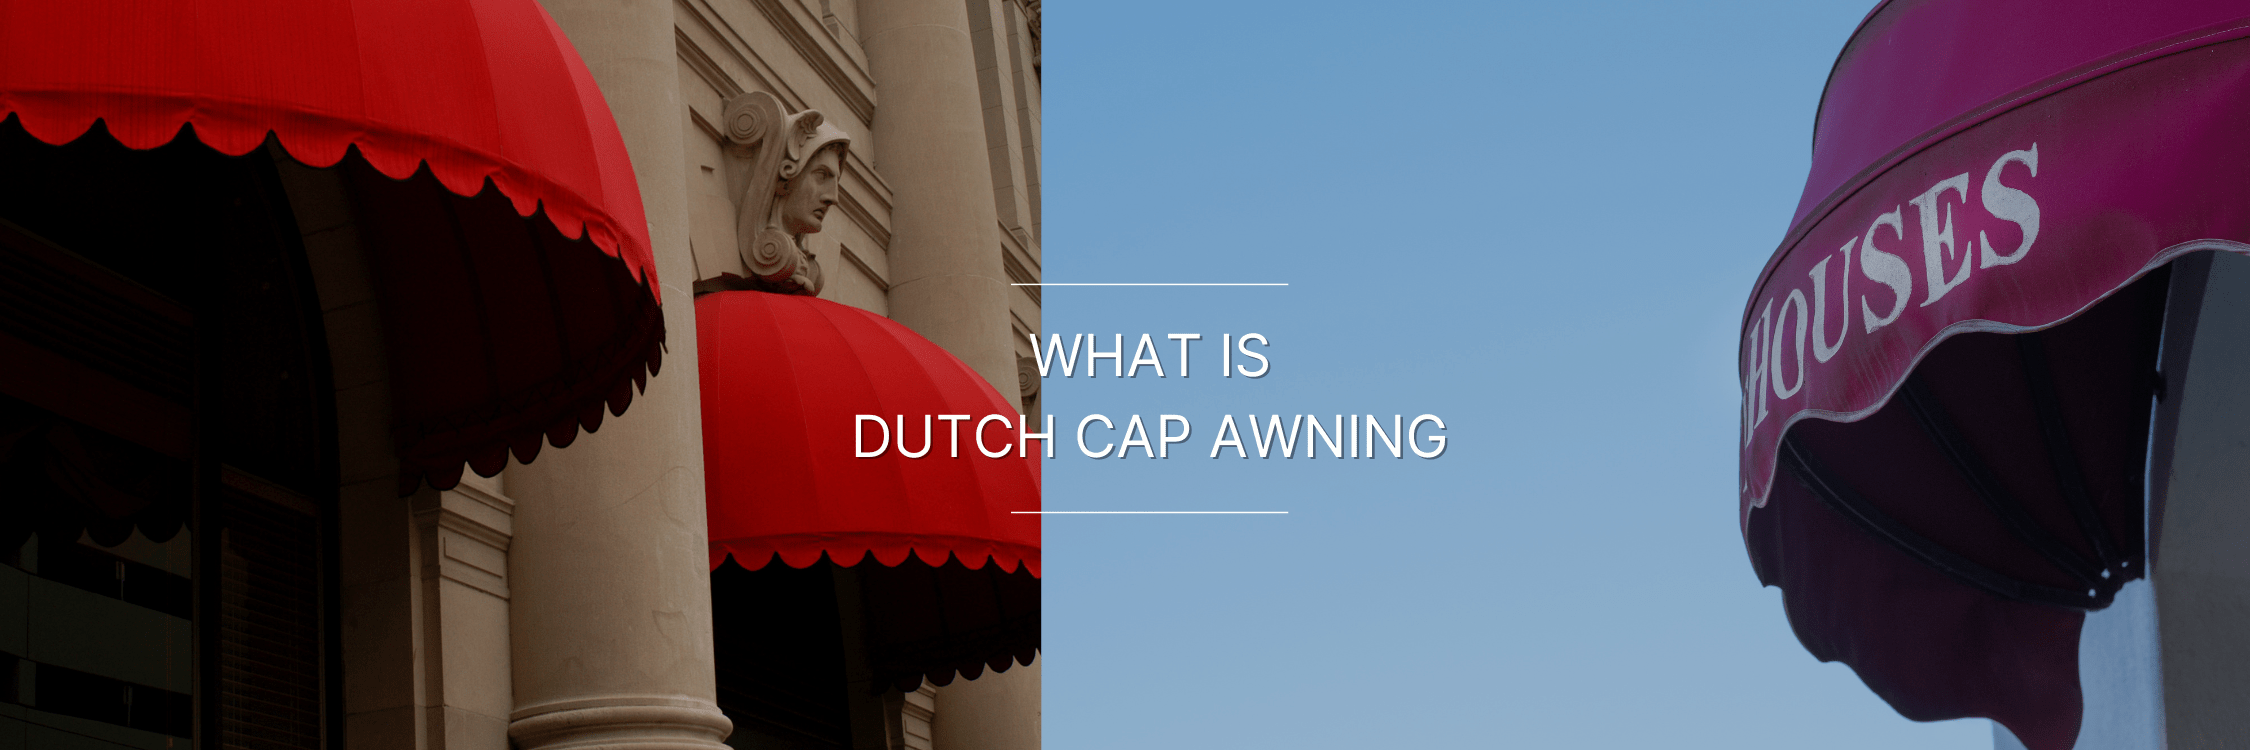 two red dutch cap awning